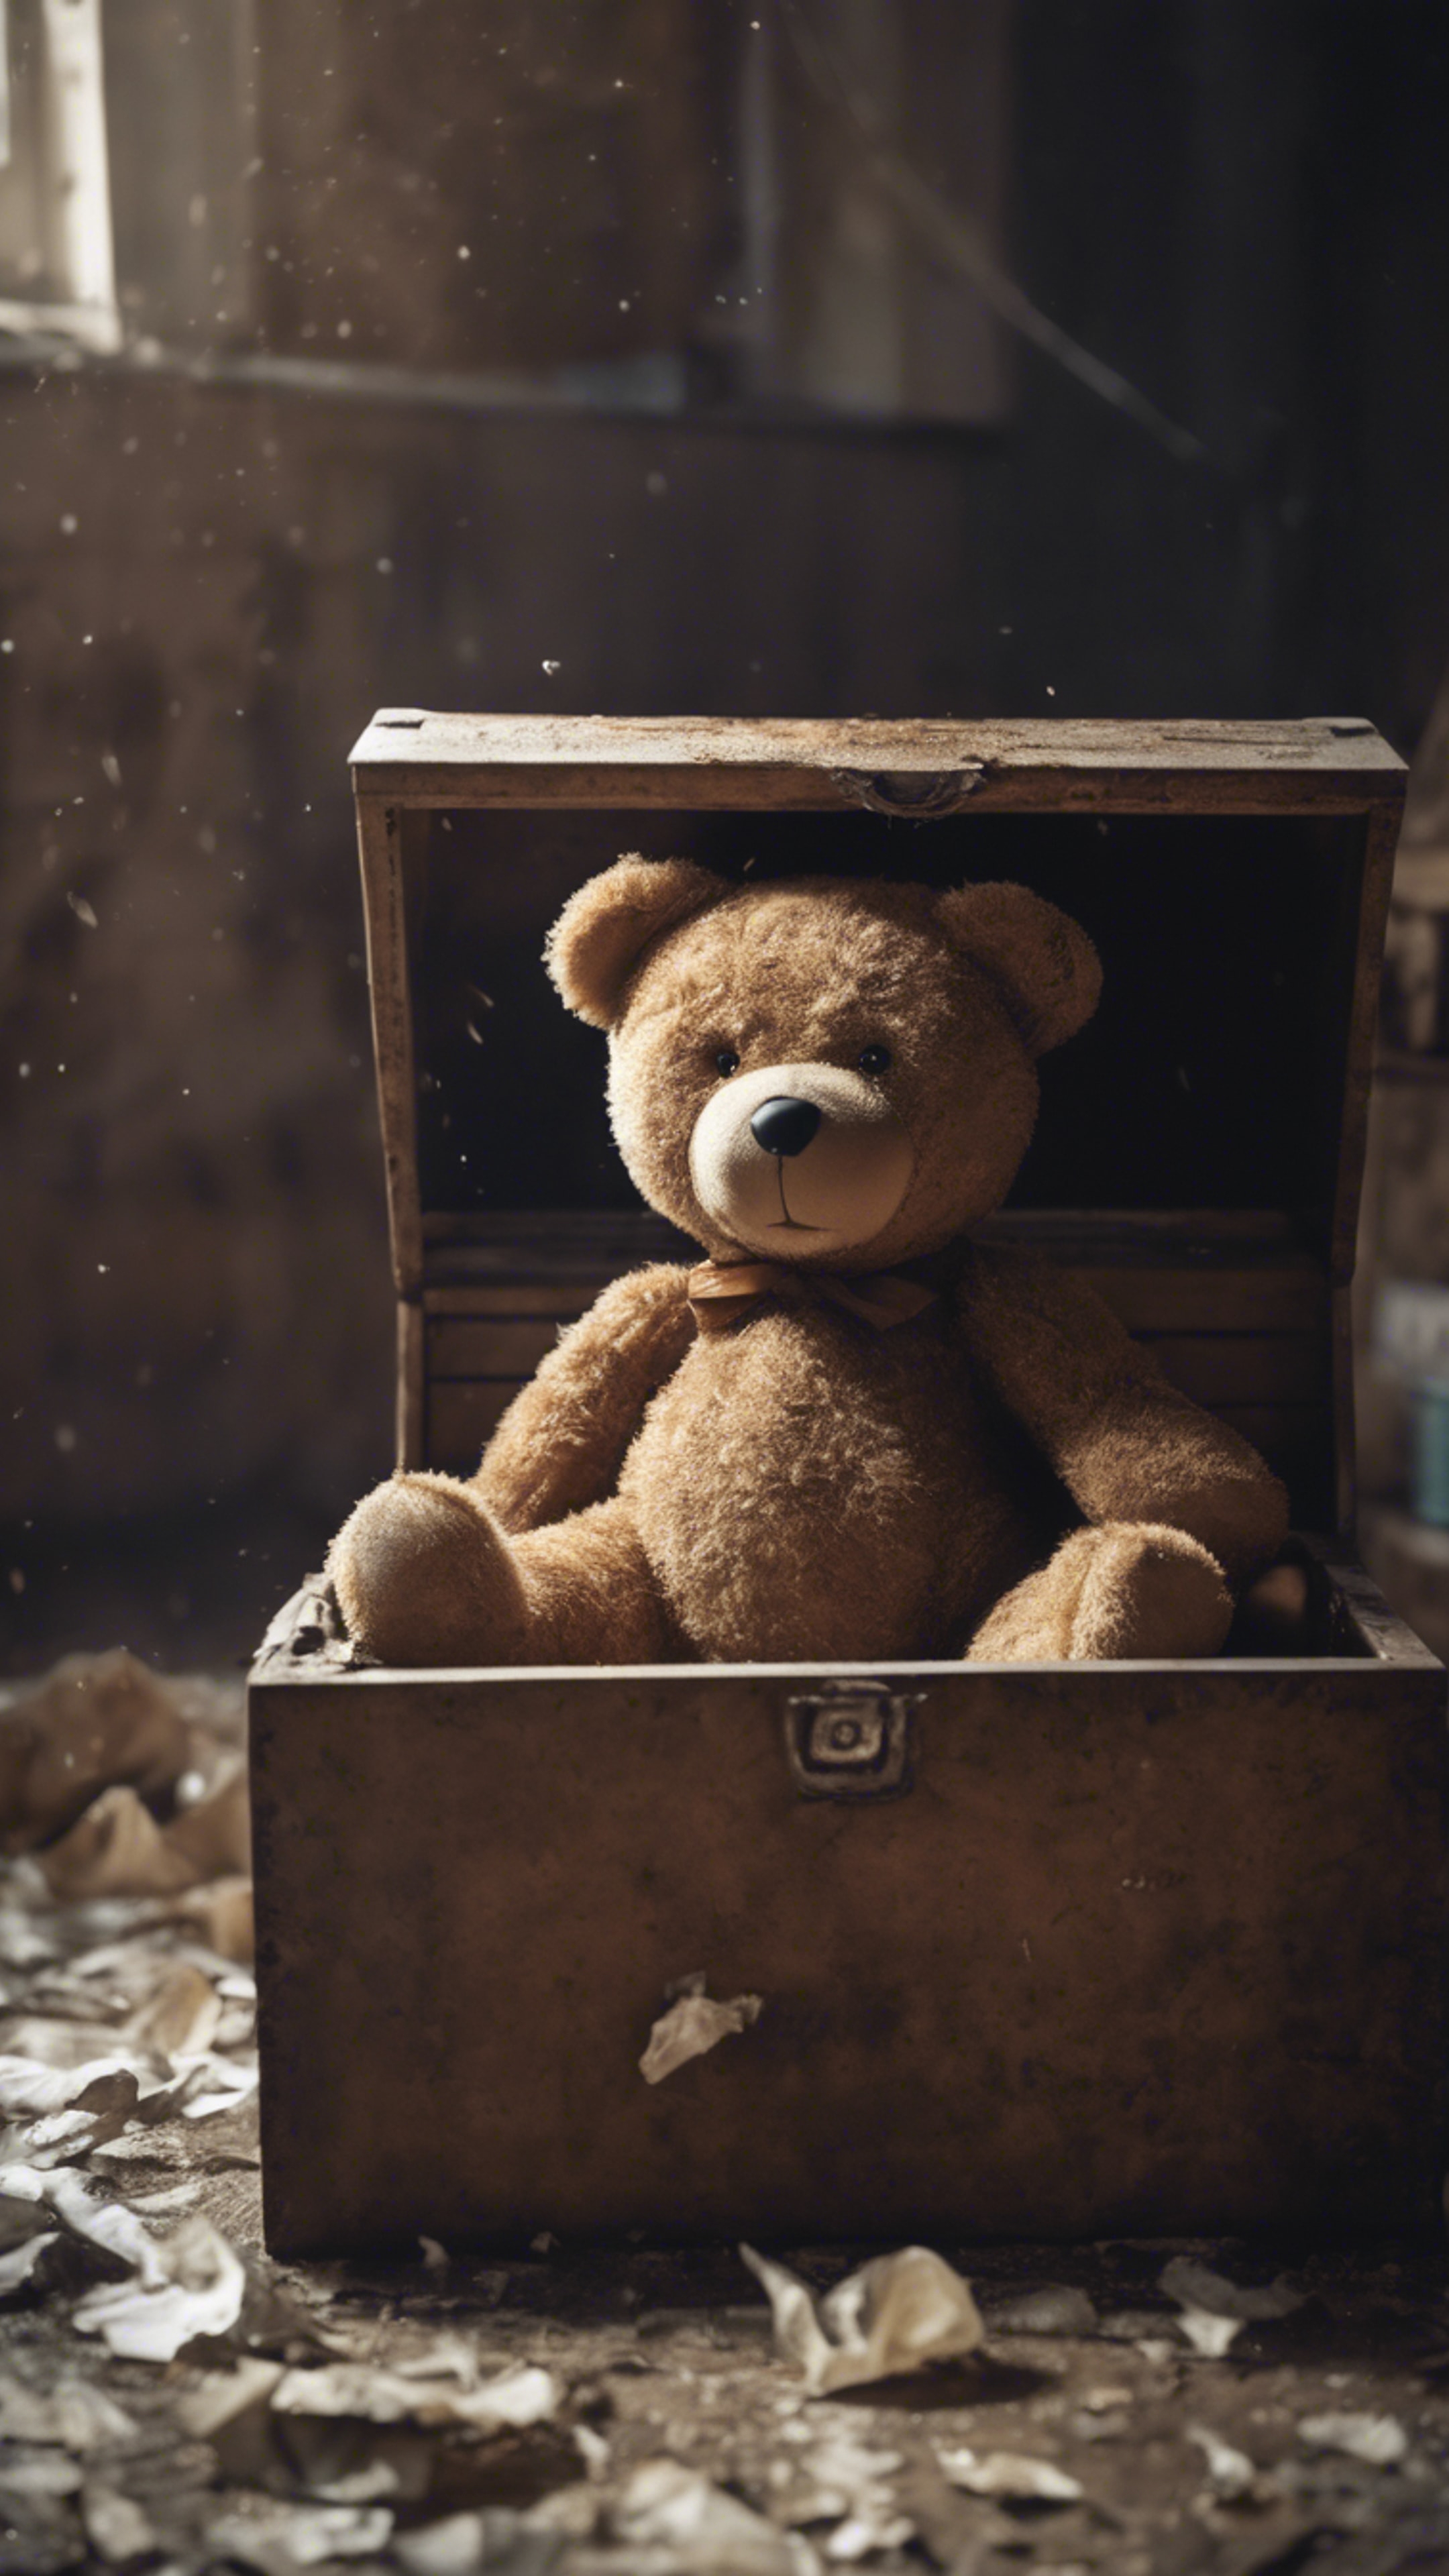 A haunted teddy bear lying in a forgotten toy box, a tear-stained face staring blankly at the ceiling. Fondo de pantalla[ba9bf5e8e31a4c05a94a]